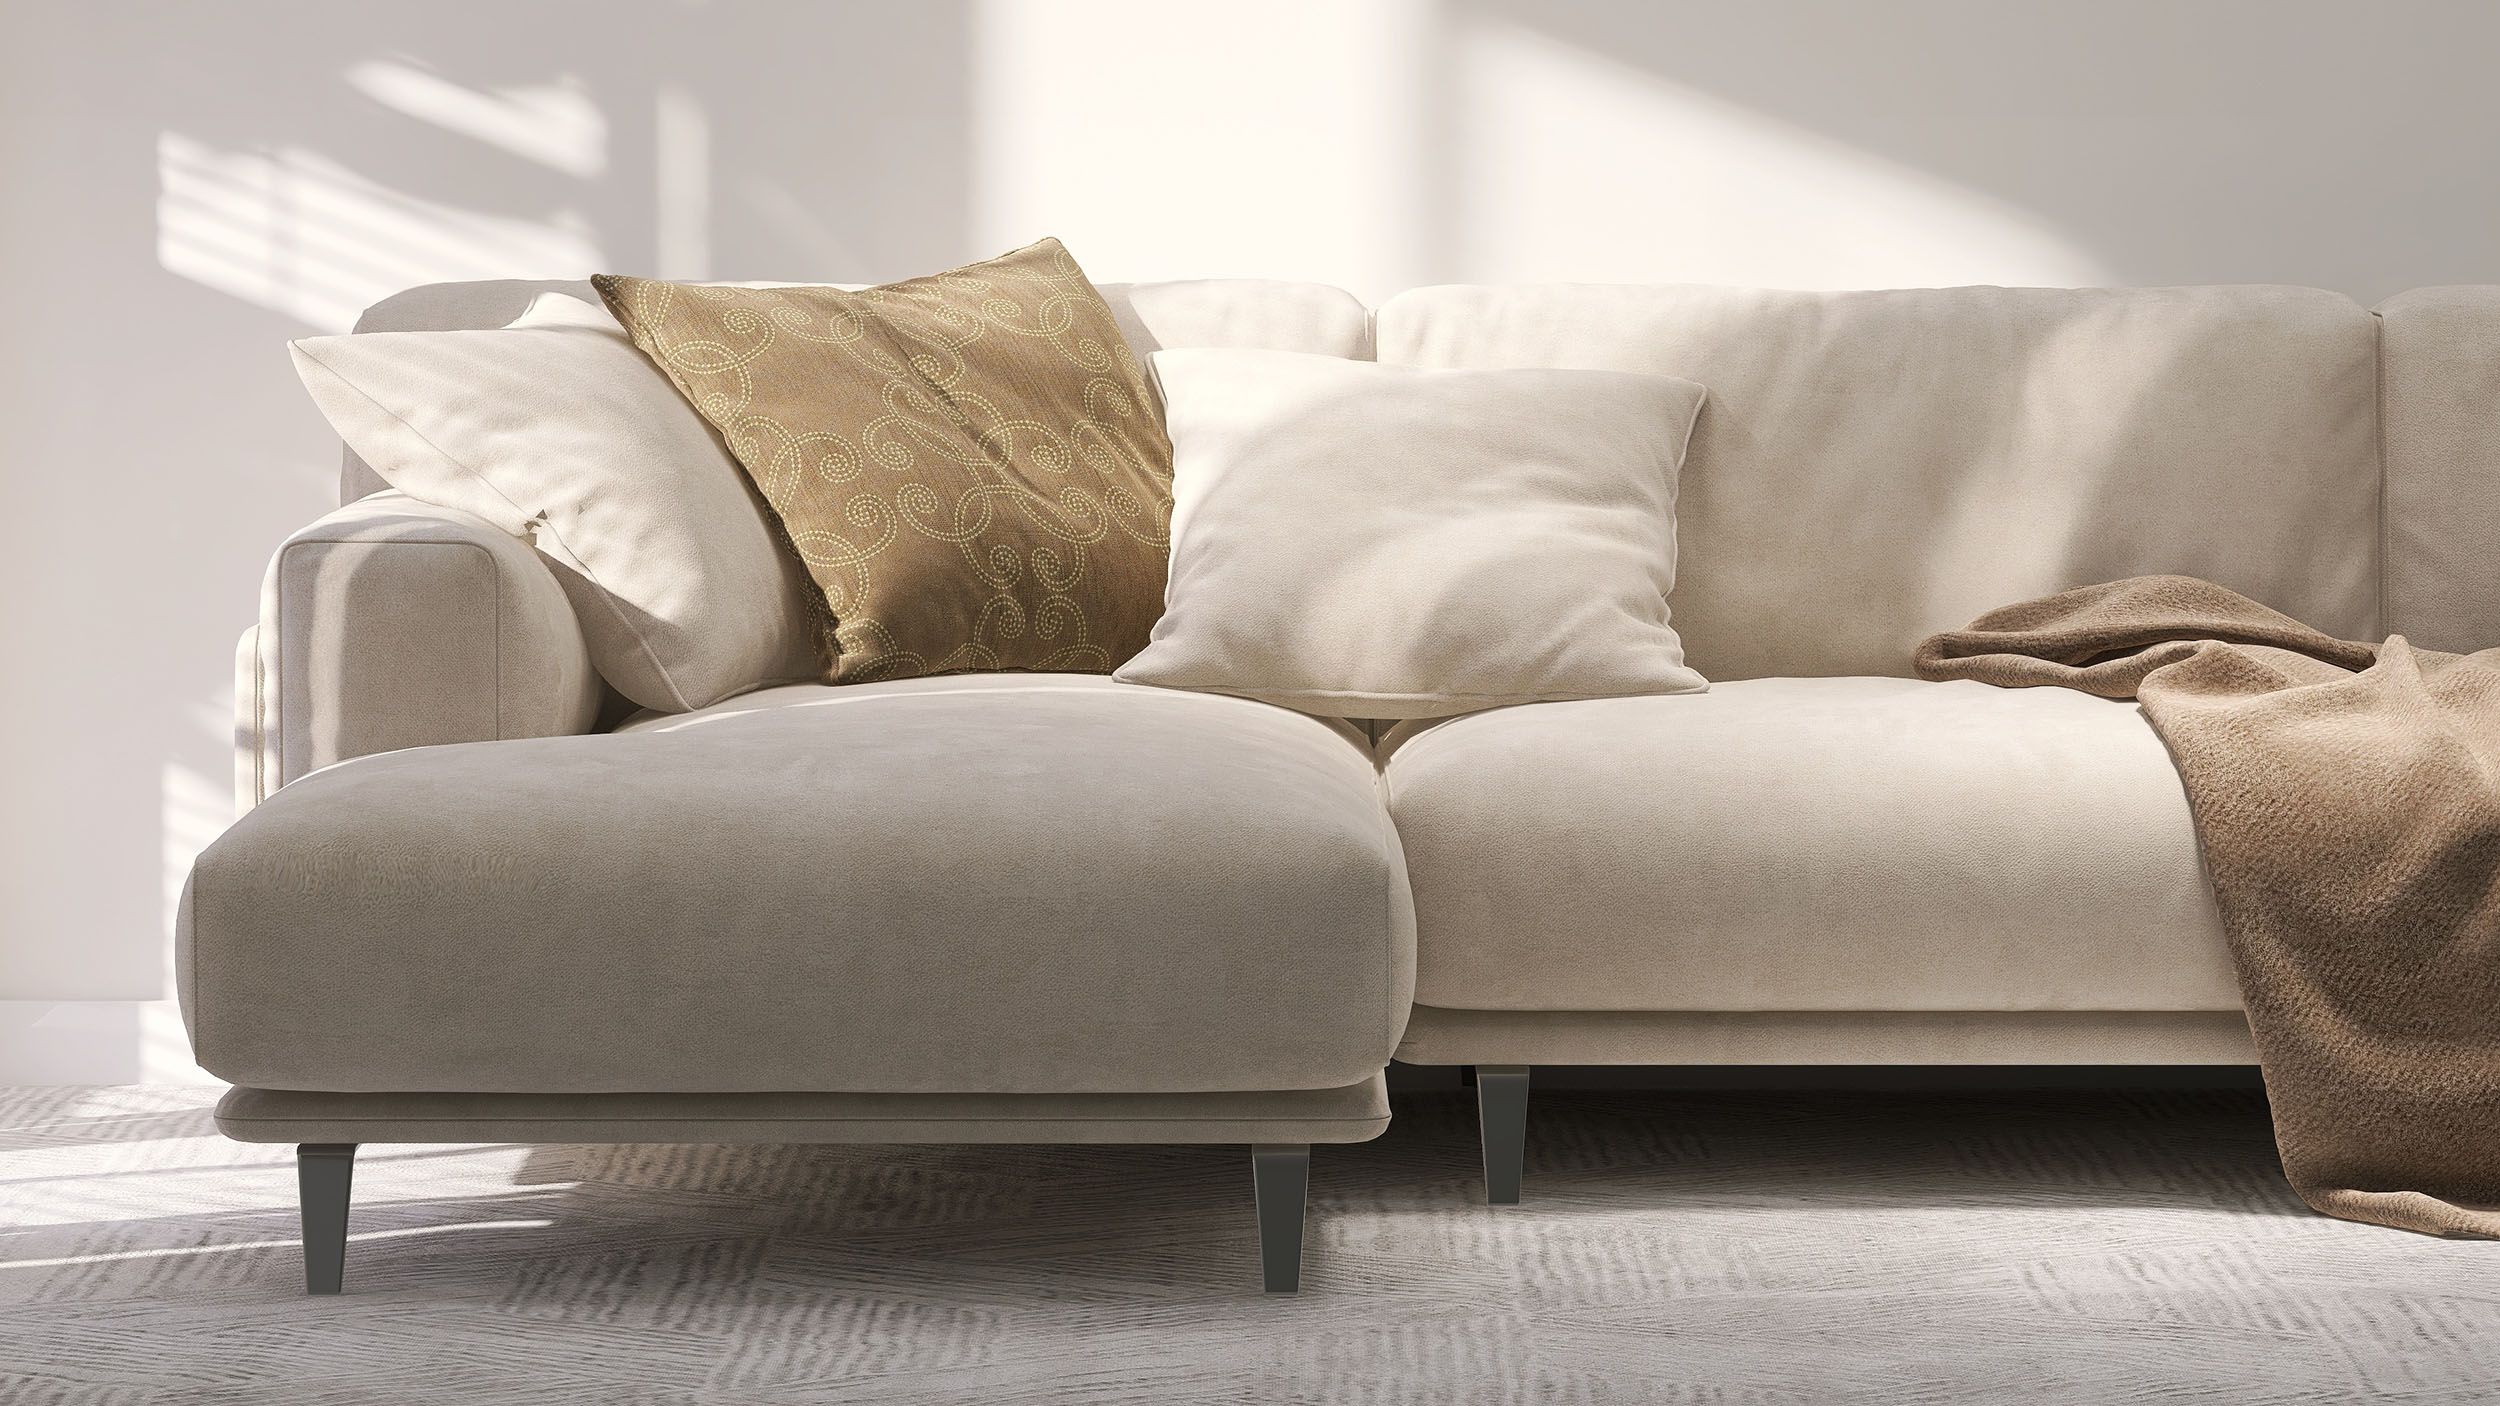 cream colored couch with pillows